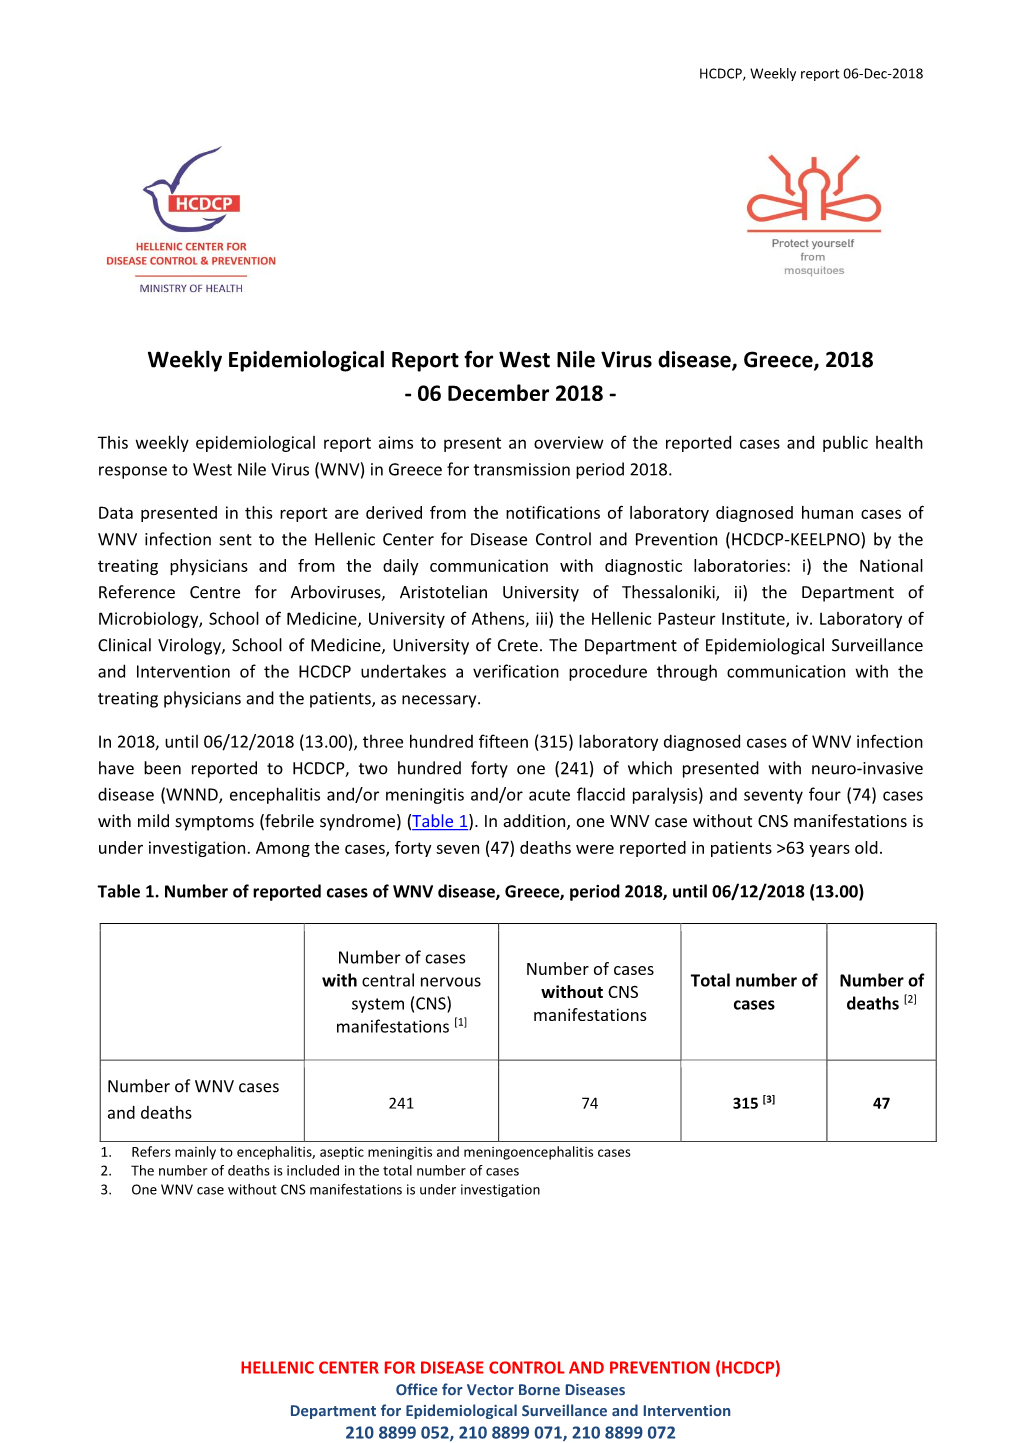 Weekly Epidemiological Report for West Nile Virus Disease, Greece, 2018 - 06 December 2018 - 1